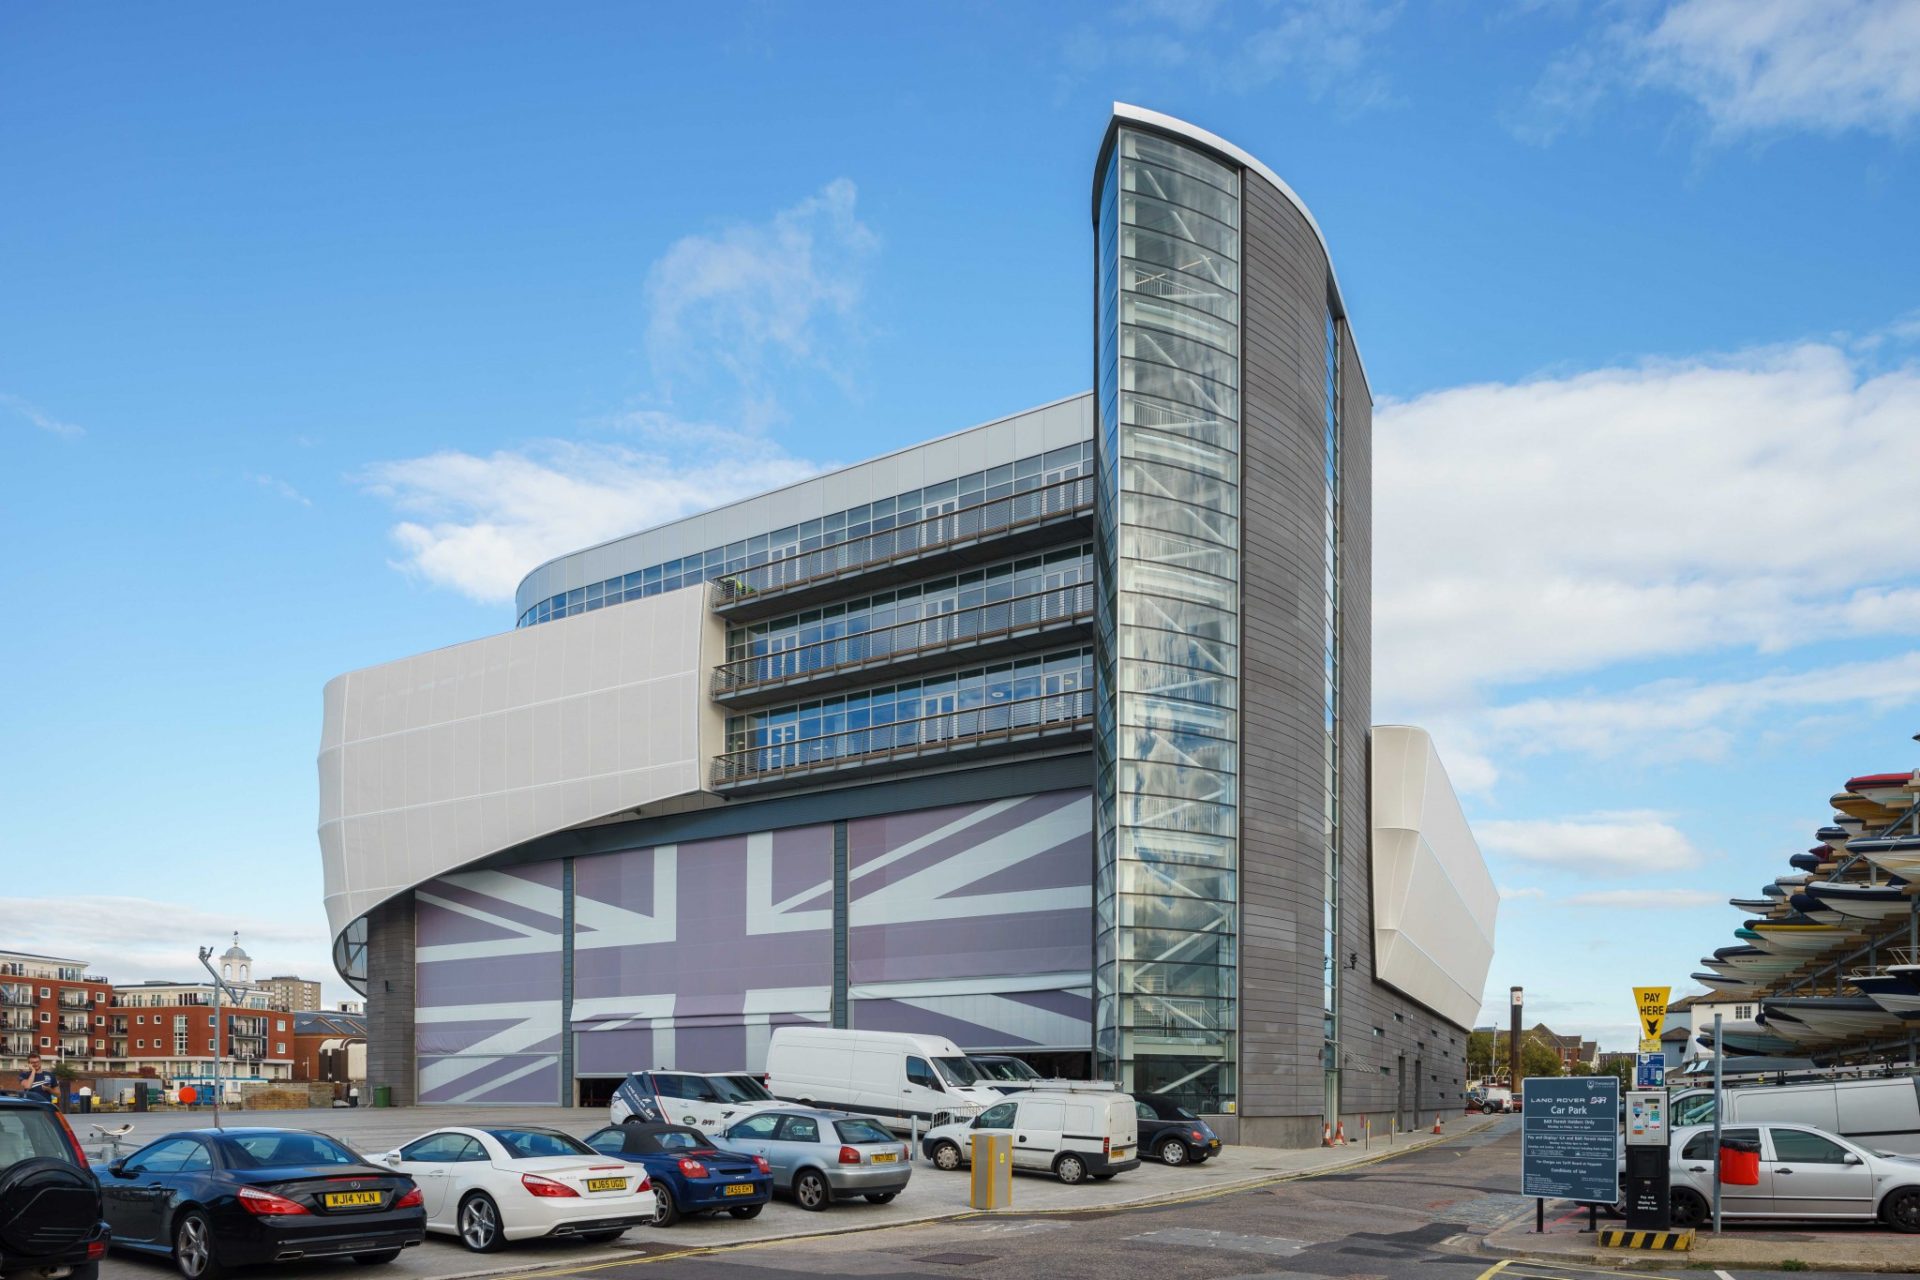 Britain’s America’s Cup HQ secures BREEAM Excellent rating